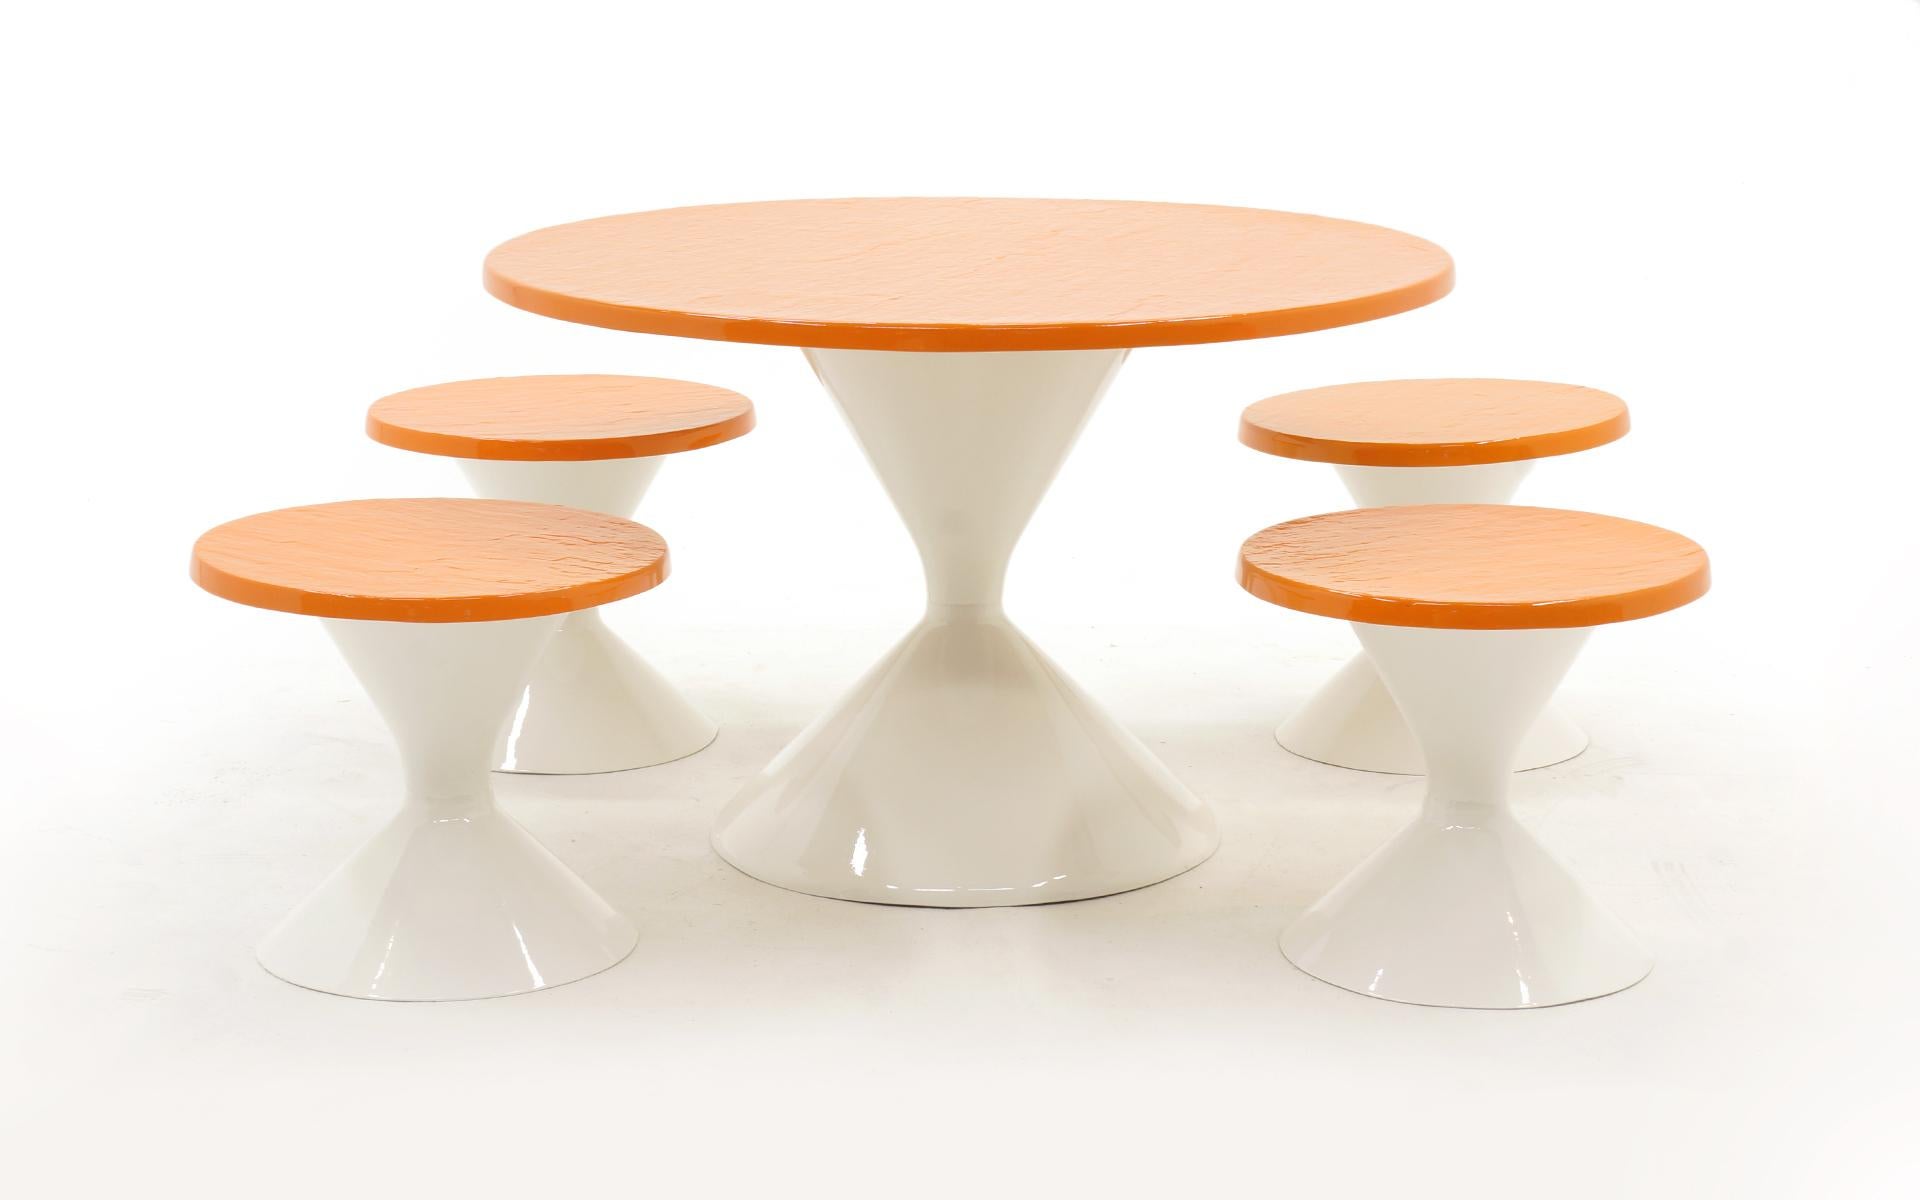 Patio round table and four seats / chairs / stools with white tulip bases and an orange faux slate top. Mod, cool, fun set. Professionally repainted with a white conversion varnish so it will be super durable outside. There are a few imperfections